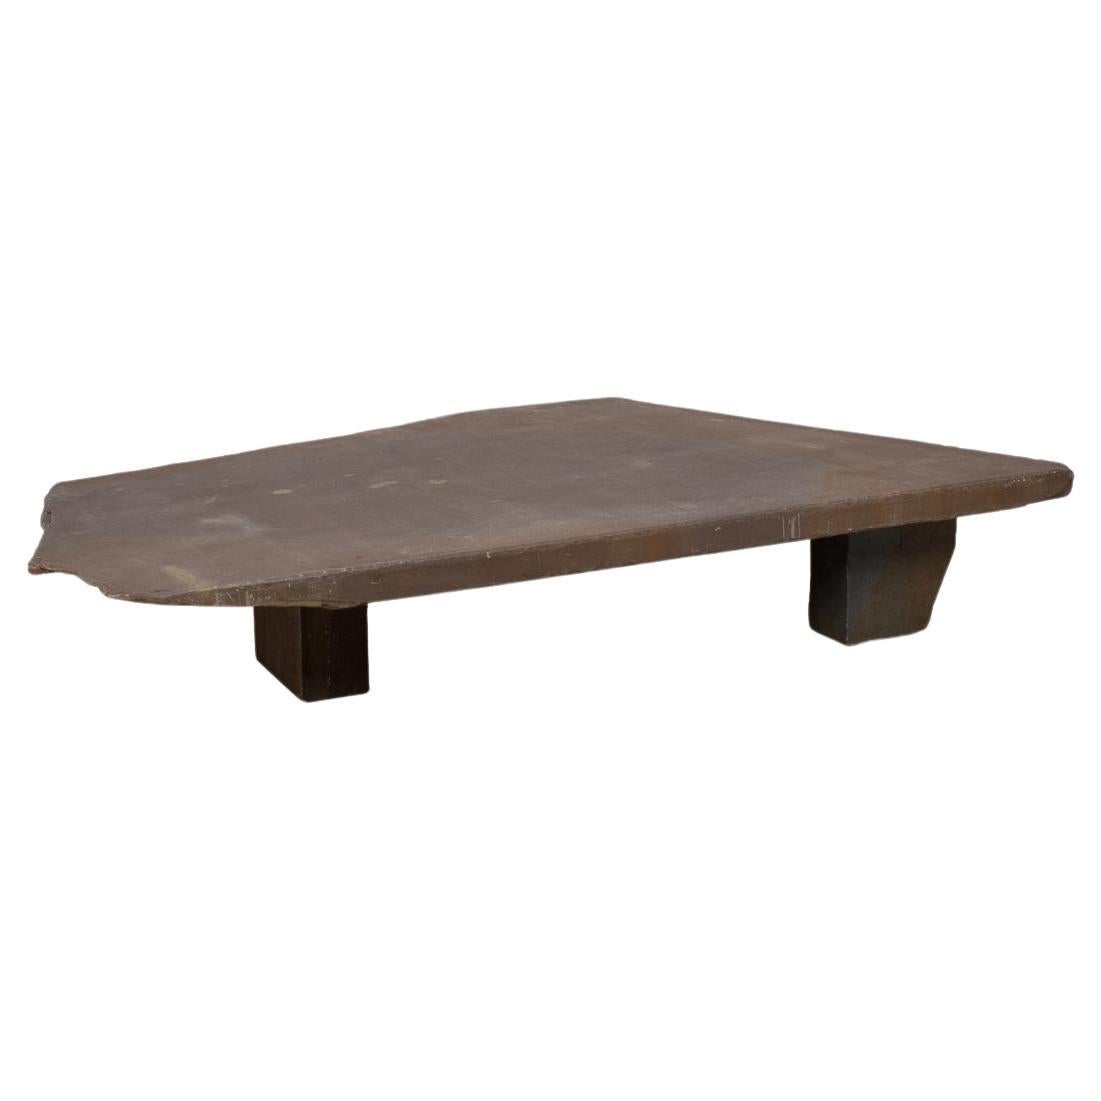 Contemporary Natural Coffee Table 03, Graywacke Offcut Stone, Carsten Inder Elst For Sale